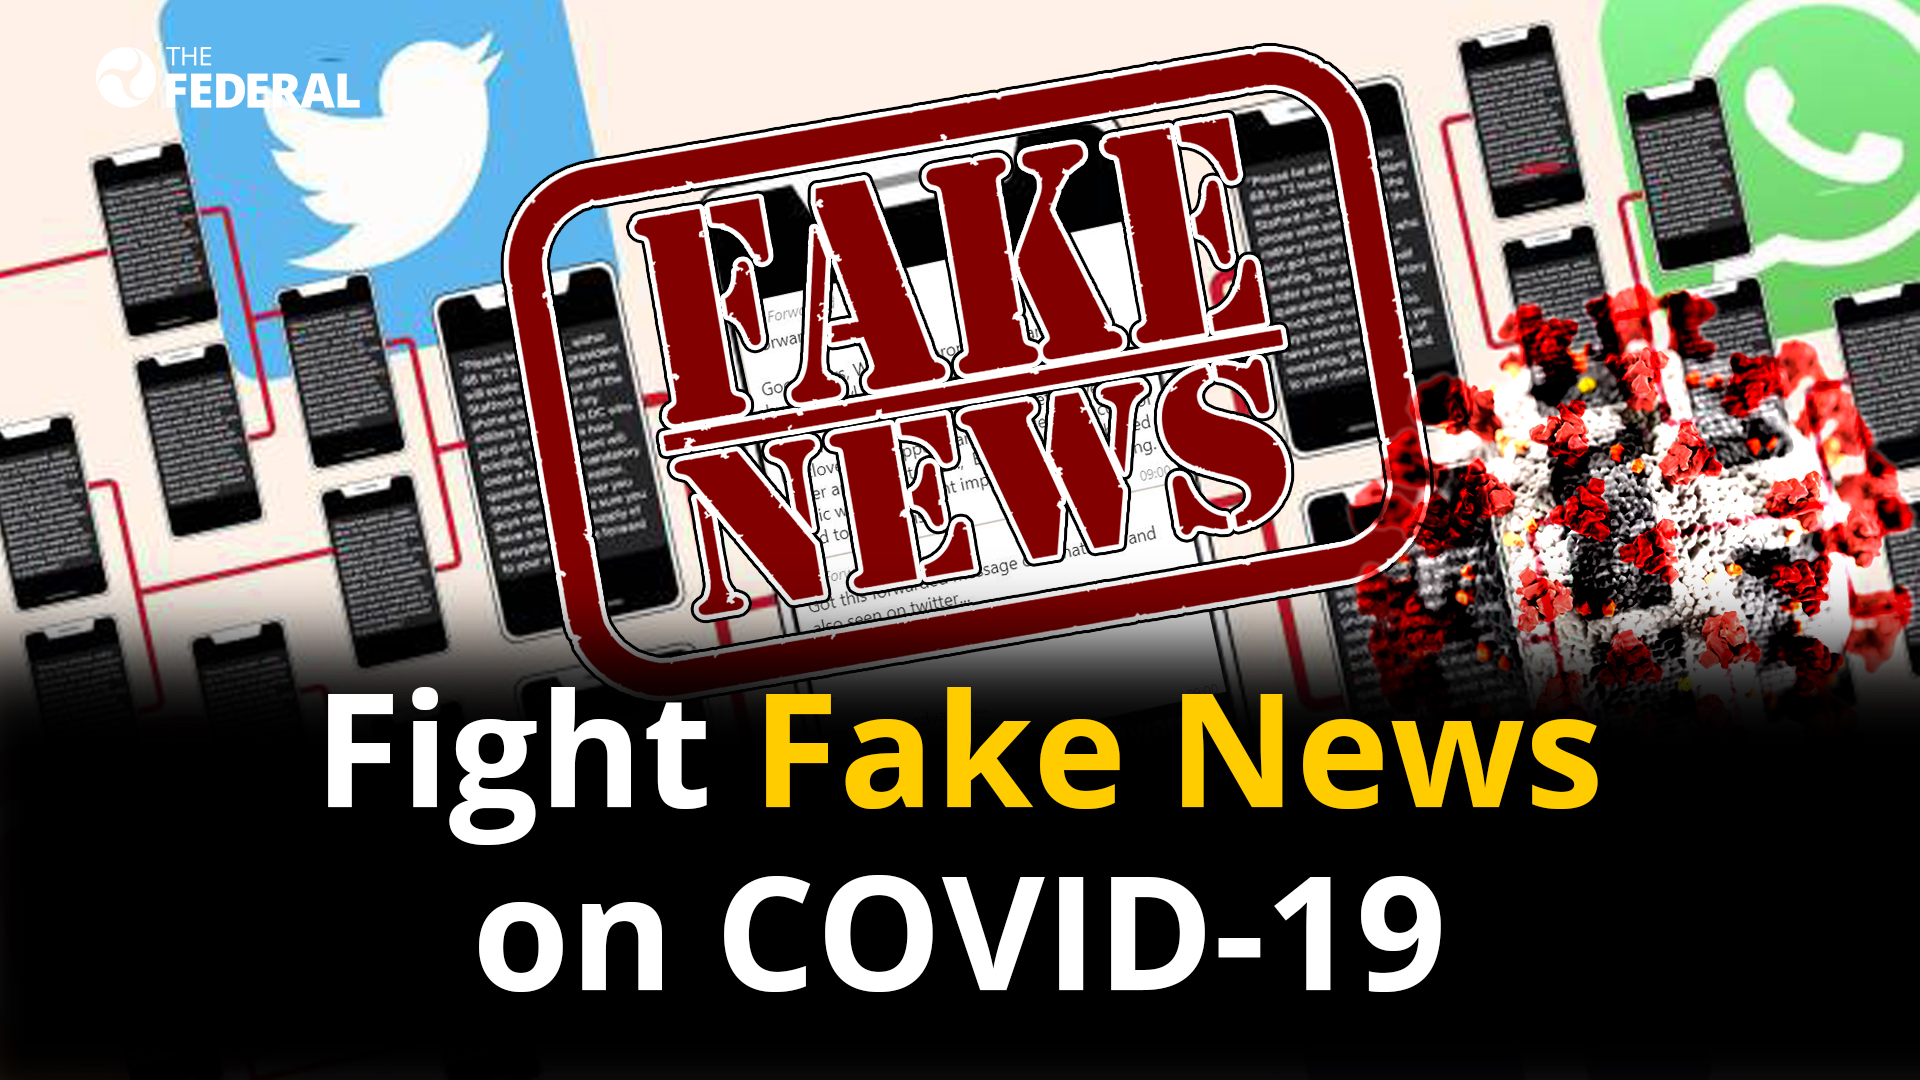 Govt, doctors help fight fake news on COVID-19